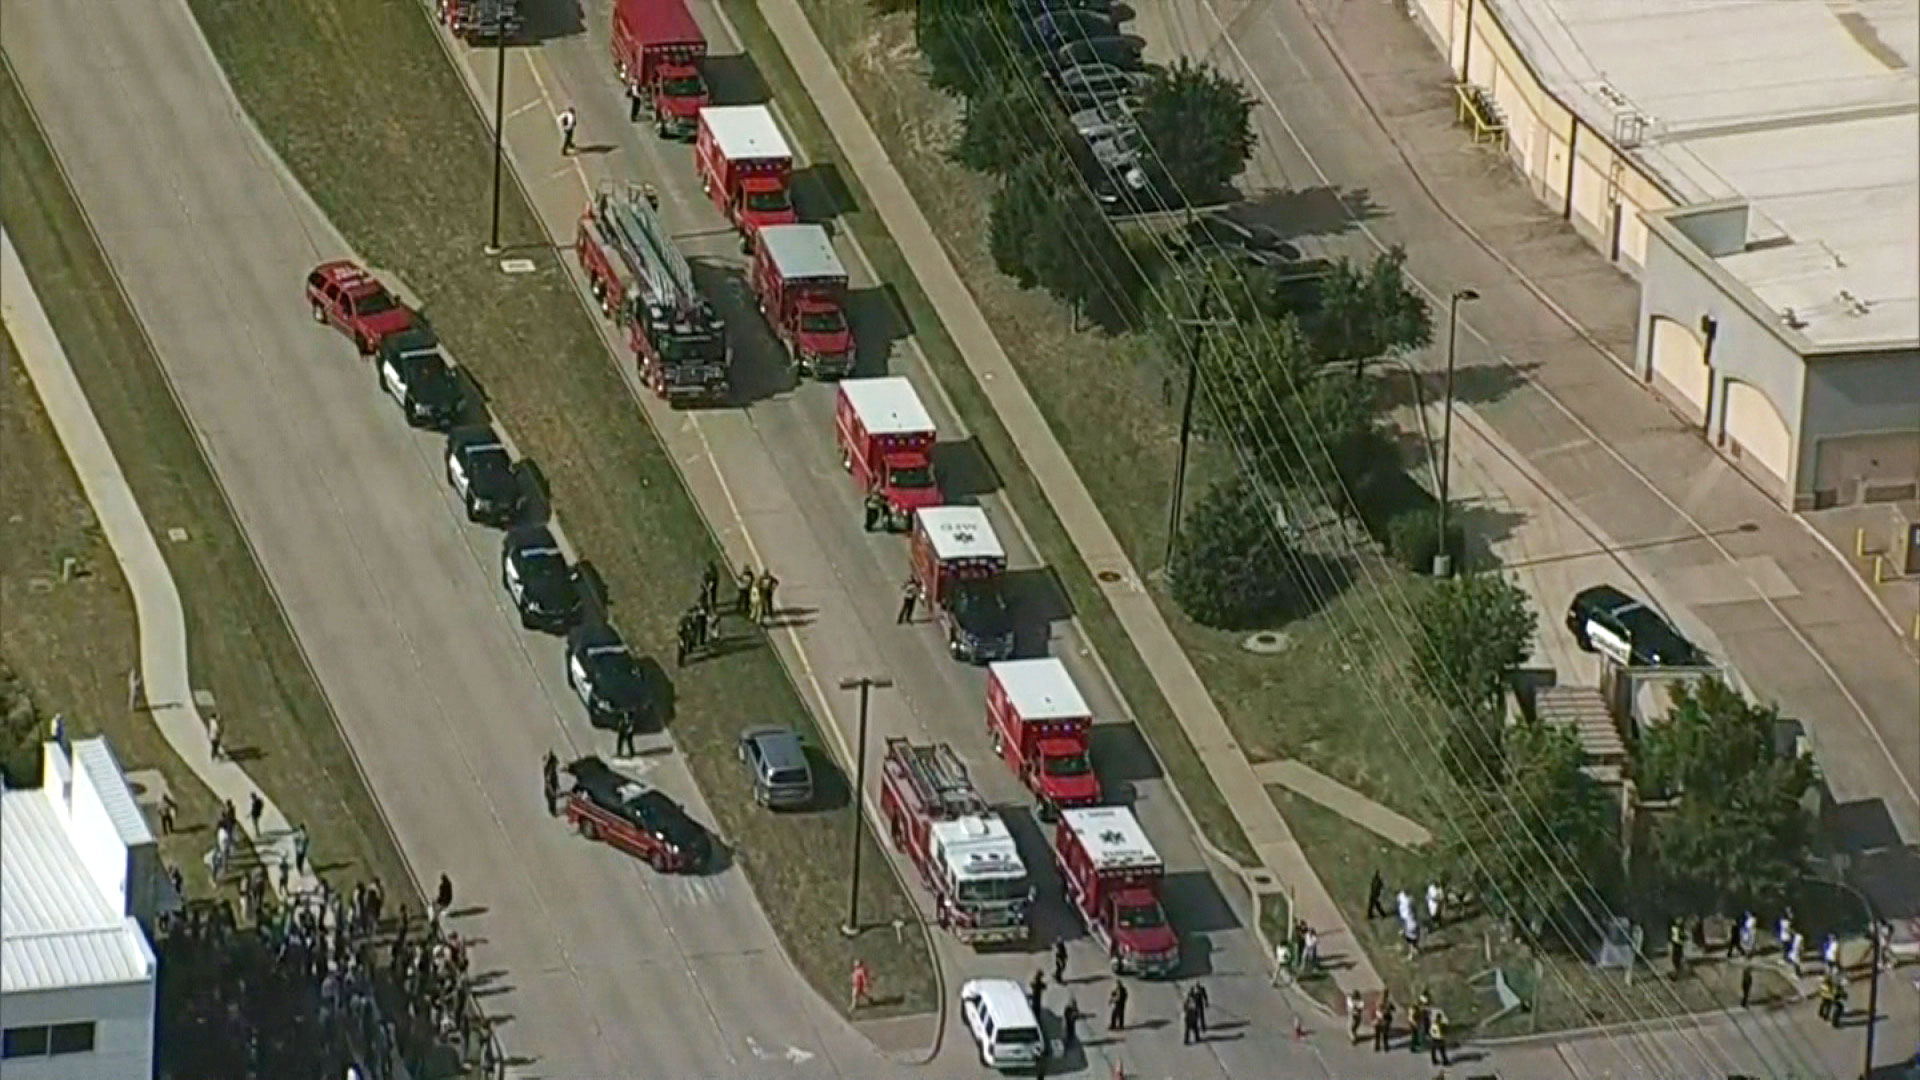 At least 9 hospitalized after shooting at Texas outlet mall 610829b5-081b-4d6c-b777-f5cd15cf4e03